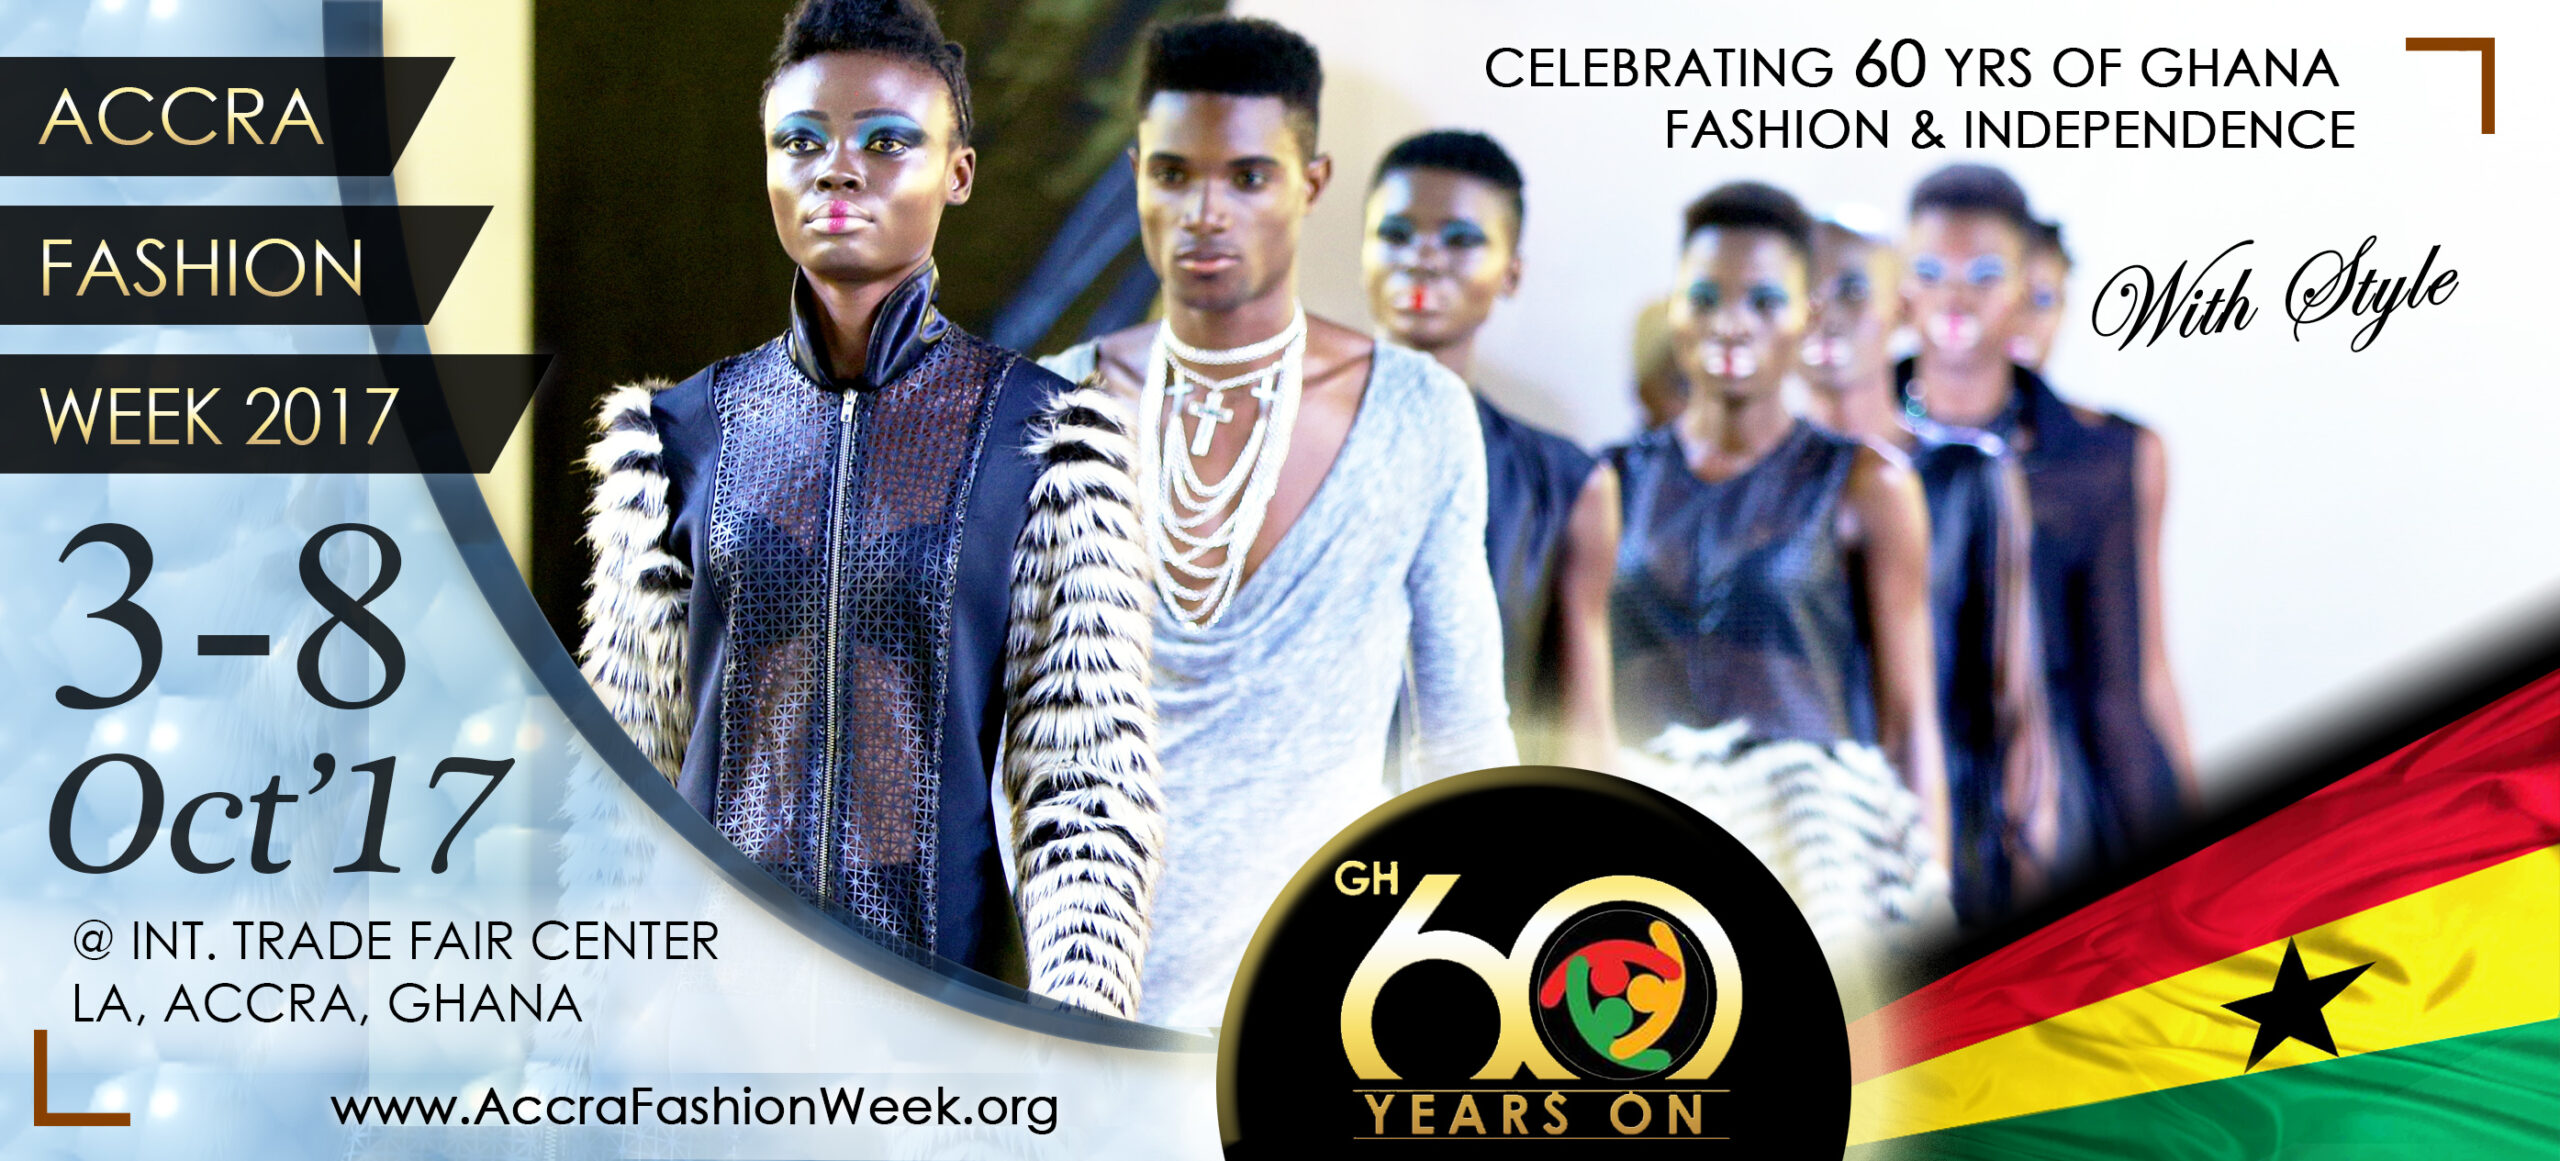 Celebrating Ghana At 60 And What It Means To Ghana And Africa’s World Of Fashion